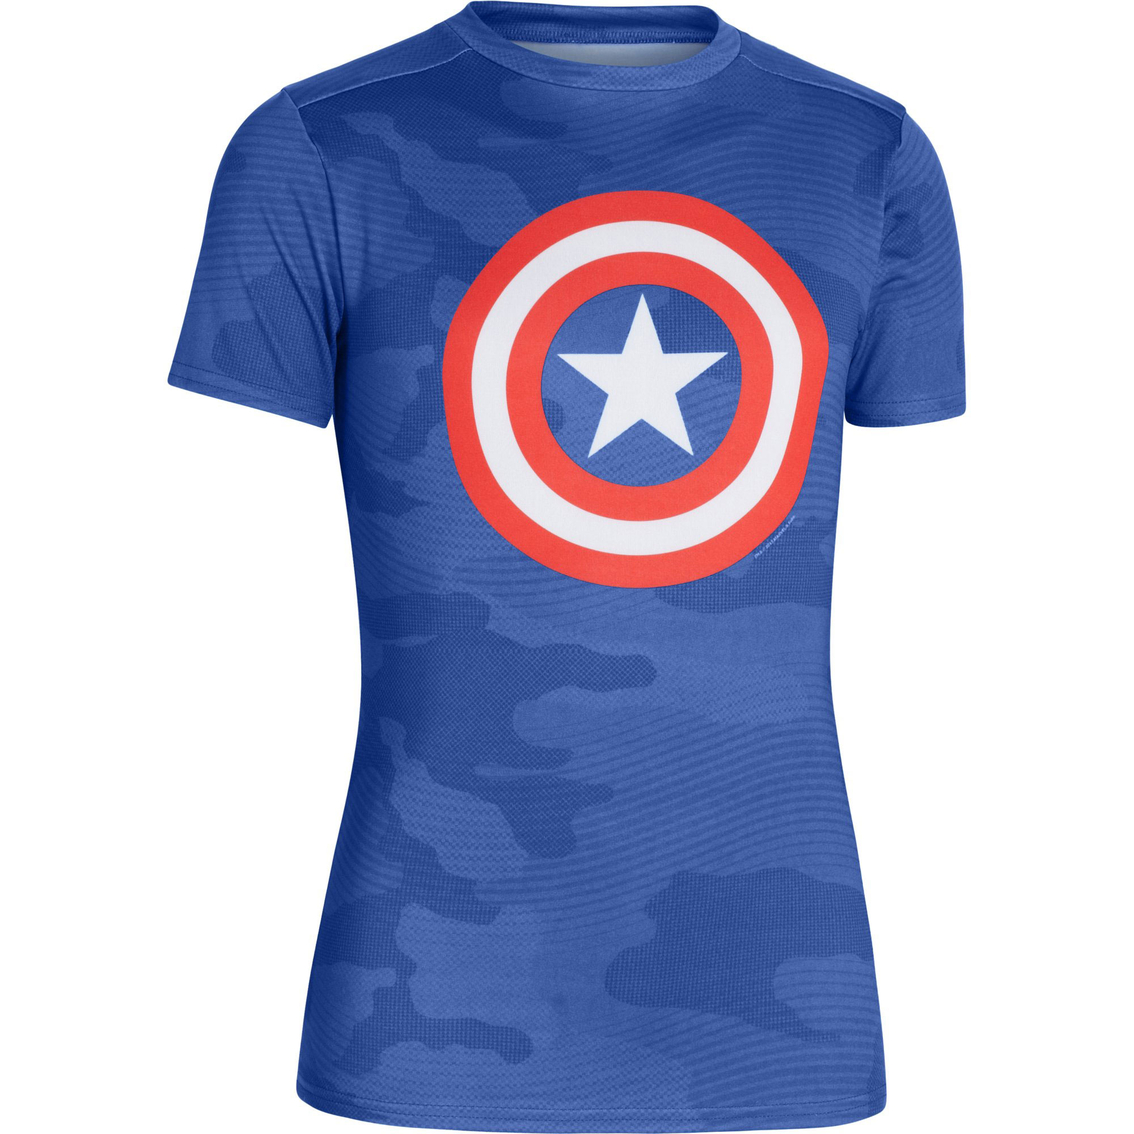 Under Armour Alter Ego America Tee | 8-20 | Clothing & Accessories | Shop The Exchange